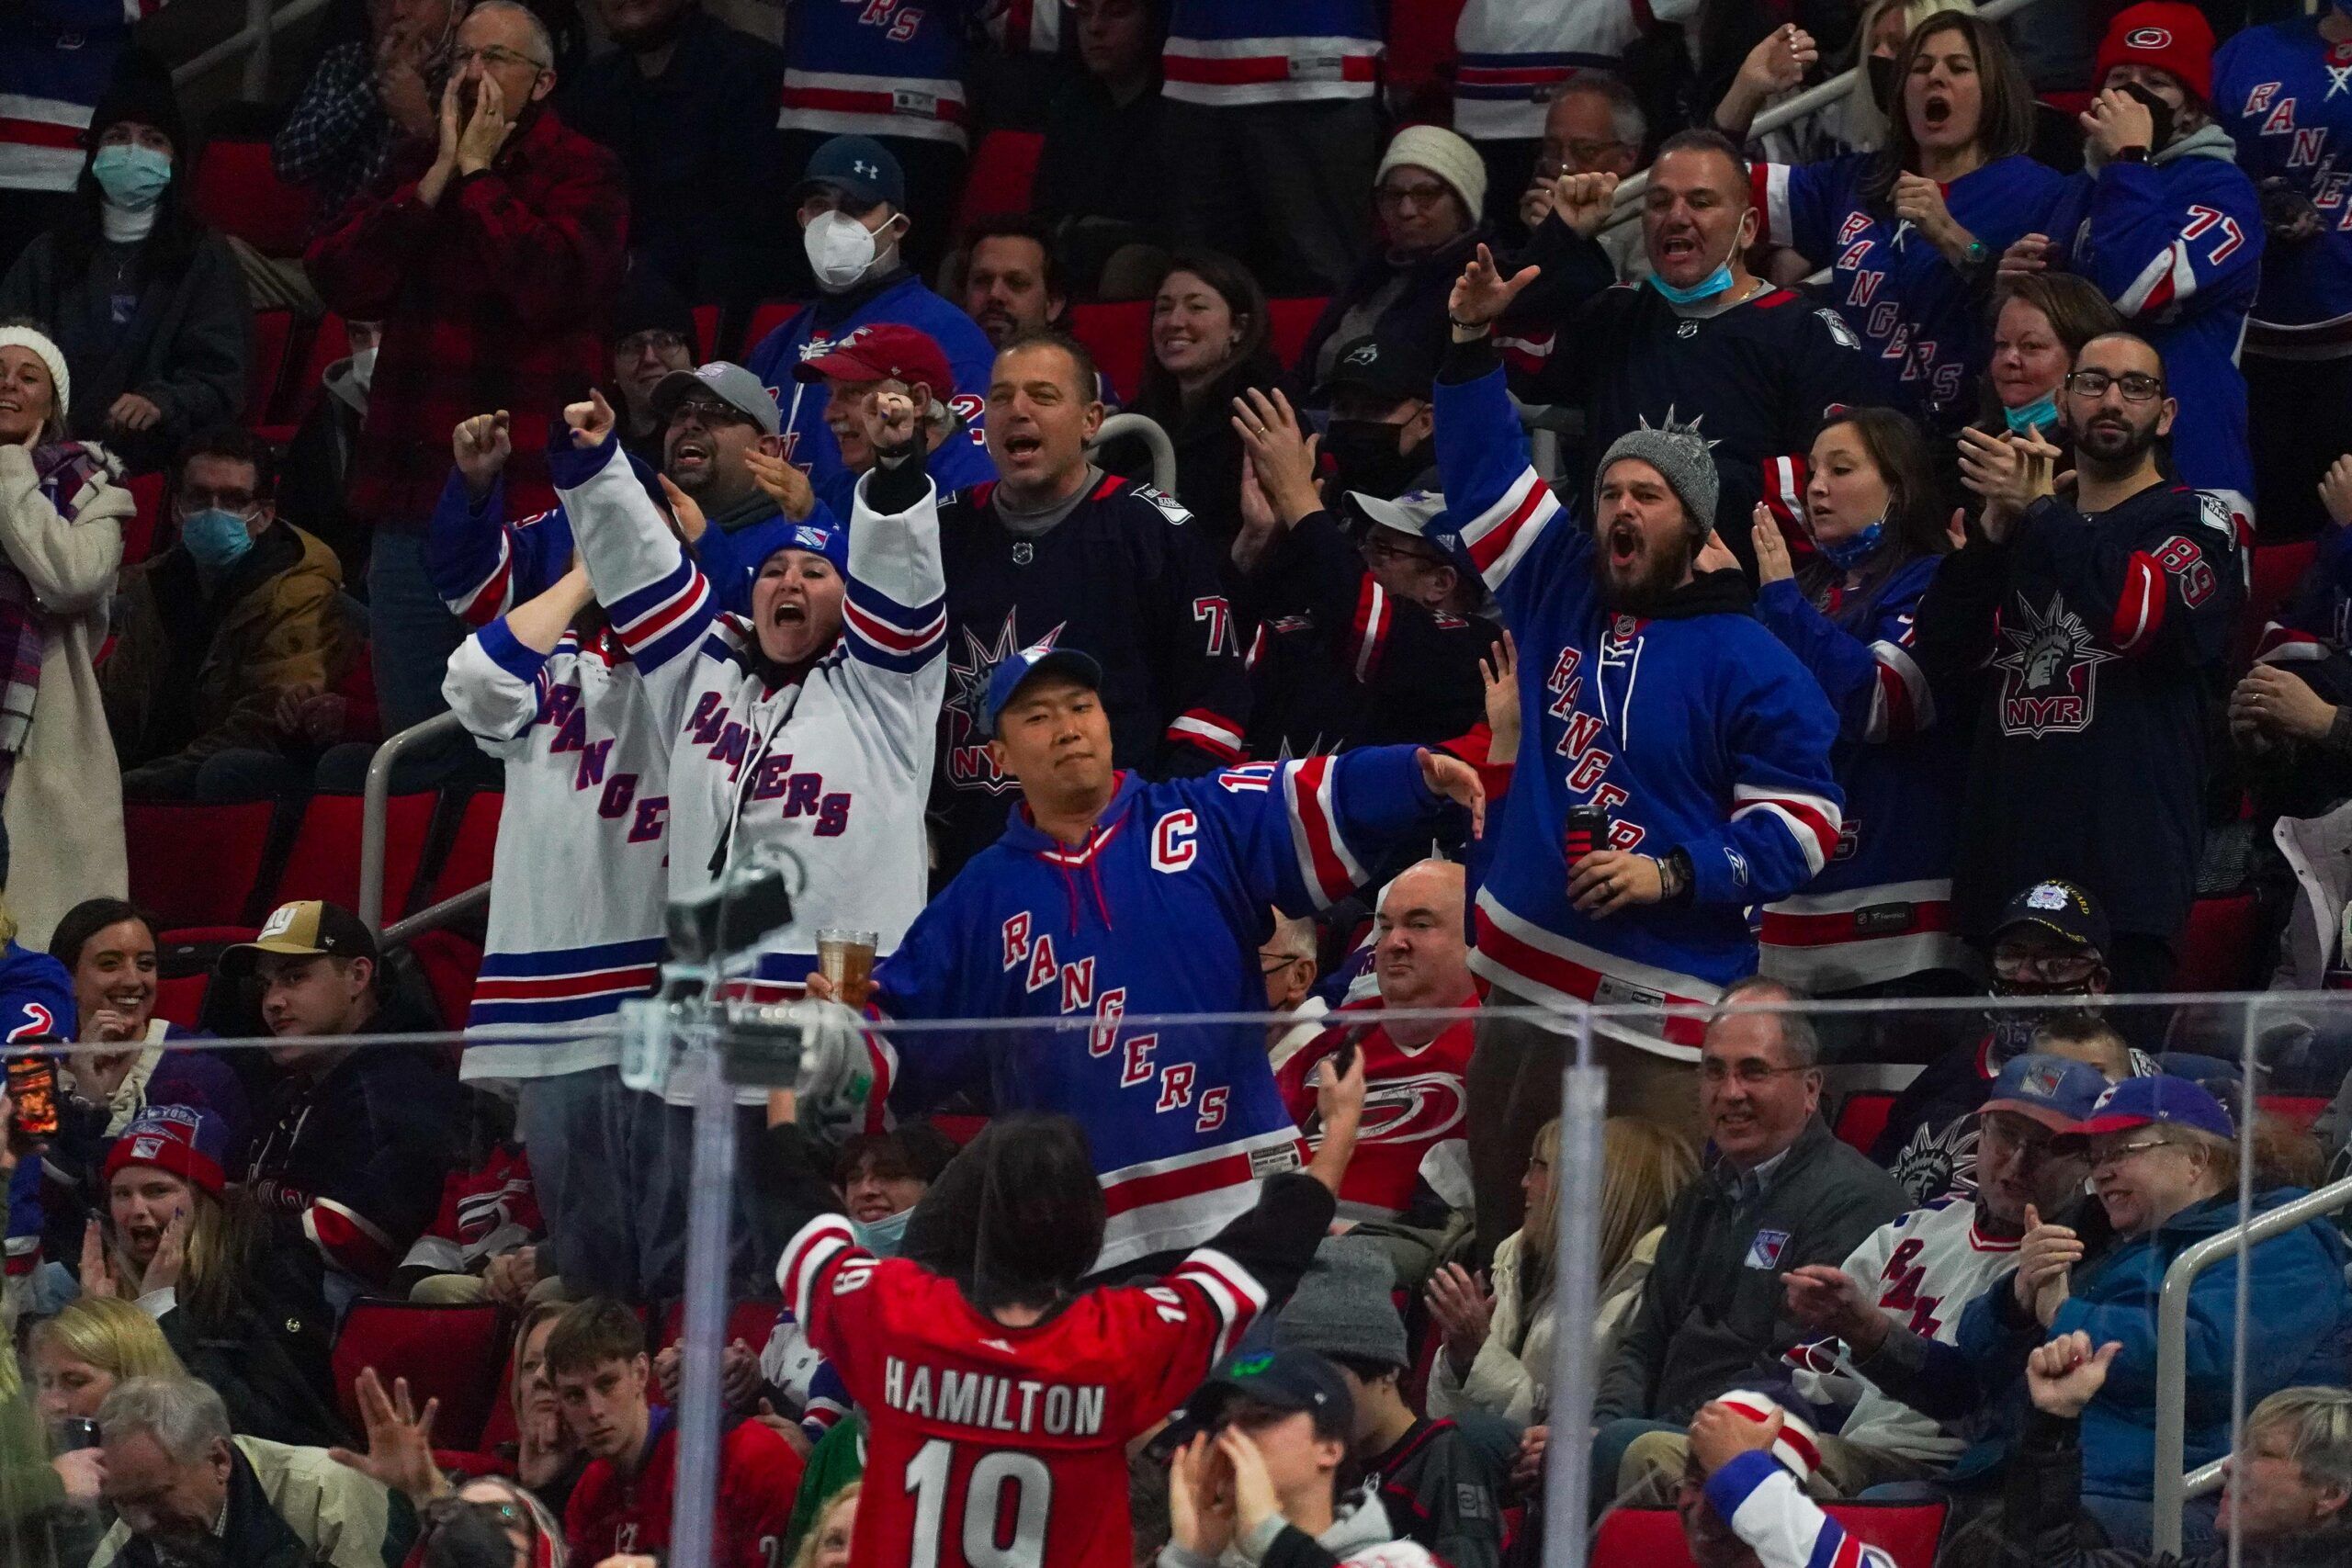 hurricanes ban ticket sales to NYR fans